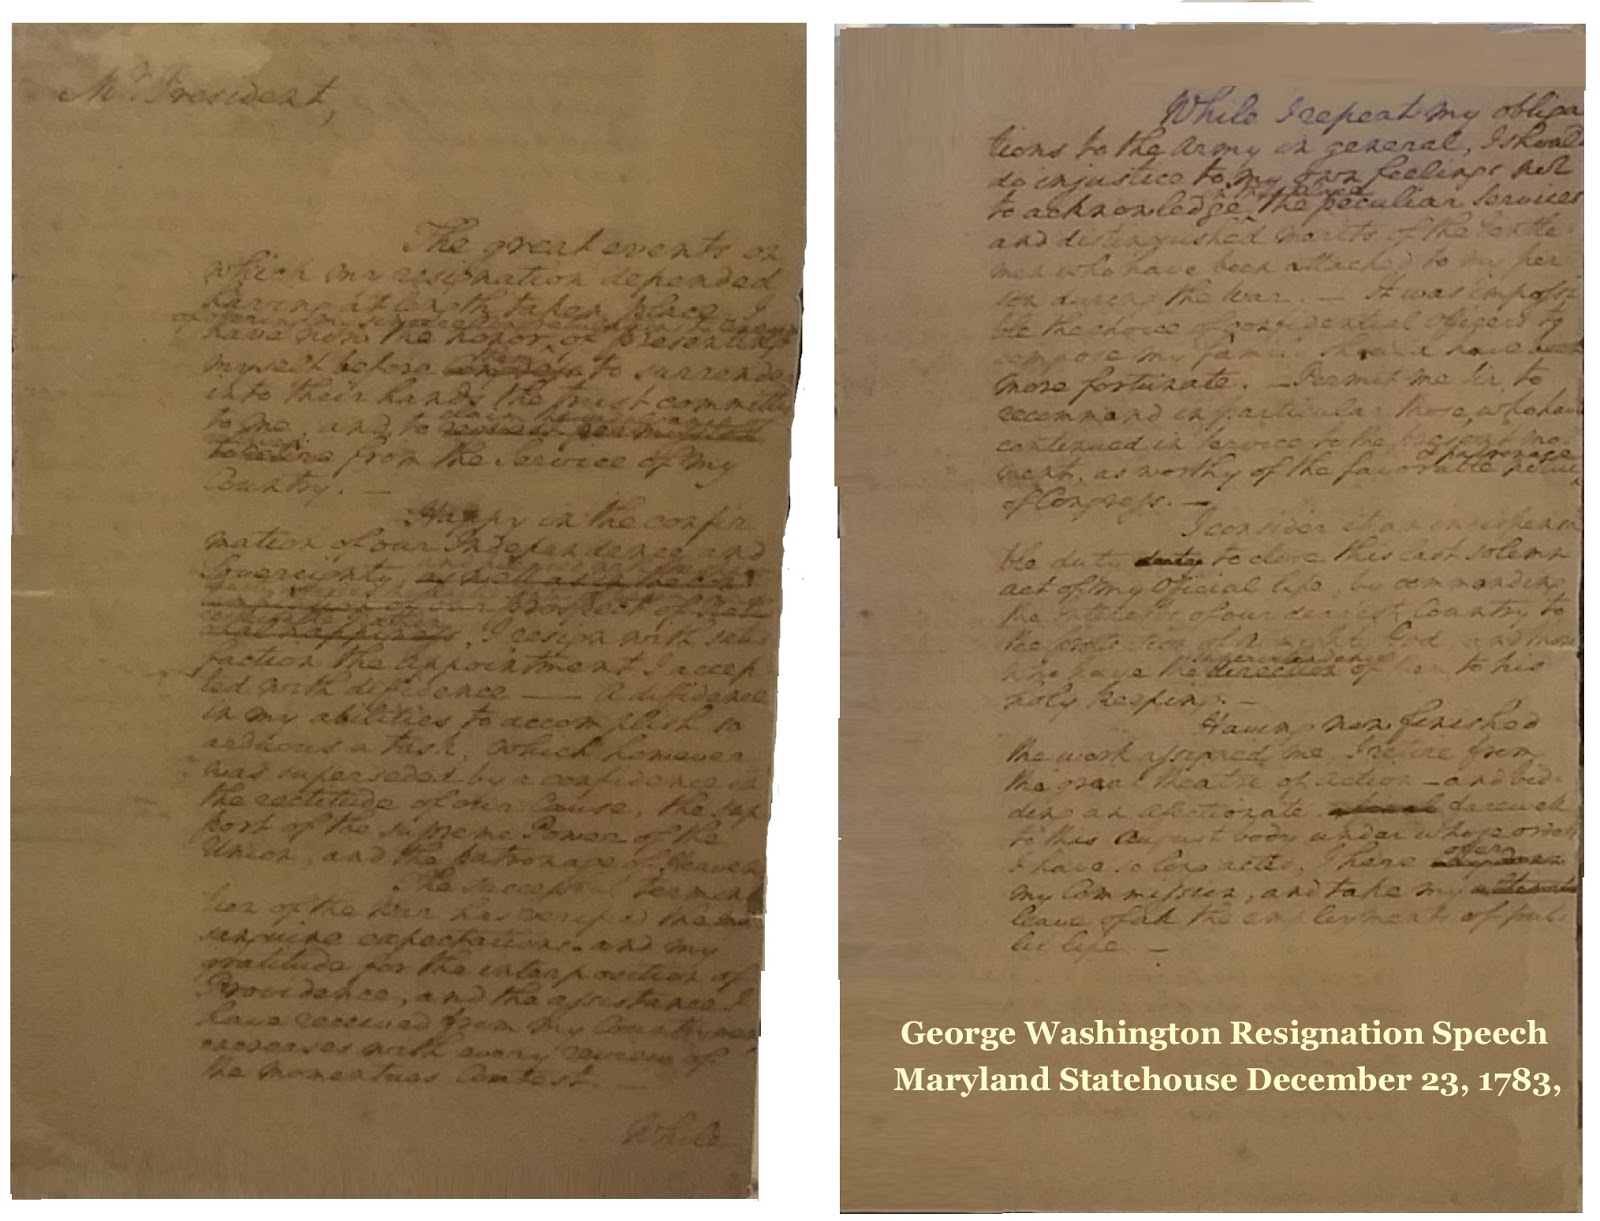 why is the name mary katherine goddard on some early copies of the declaration of independence